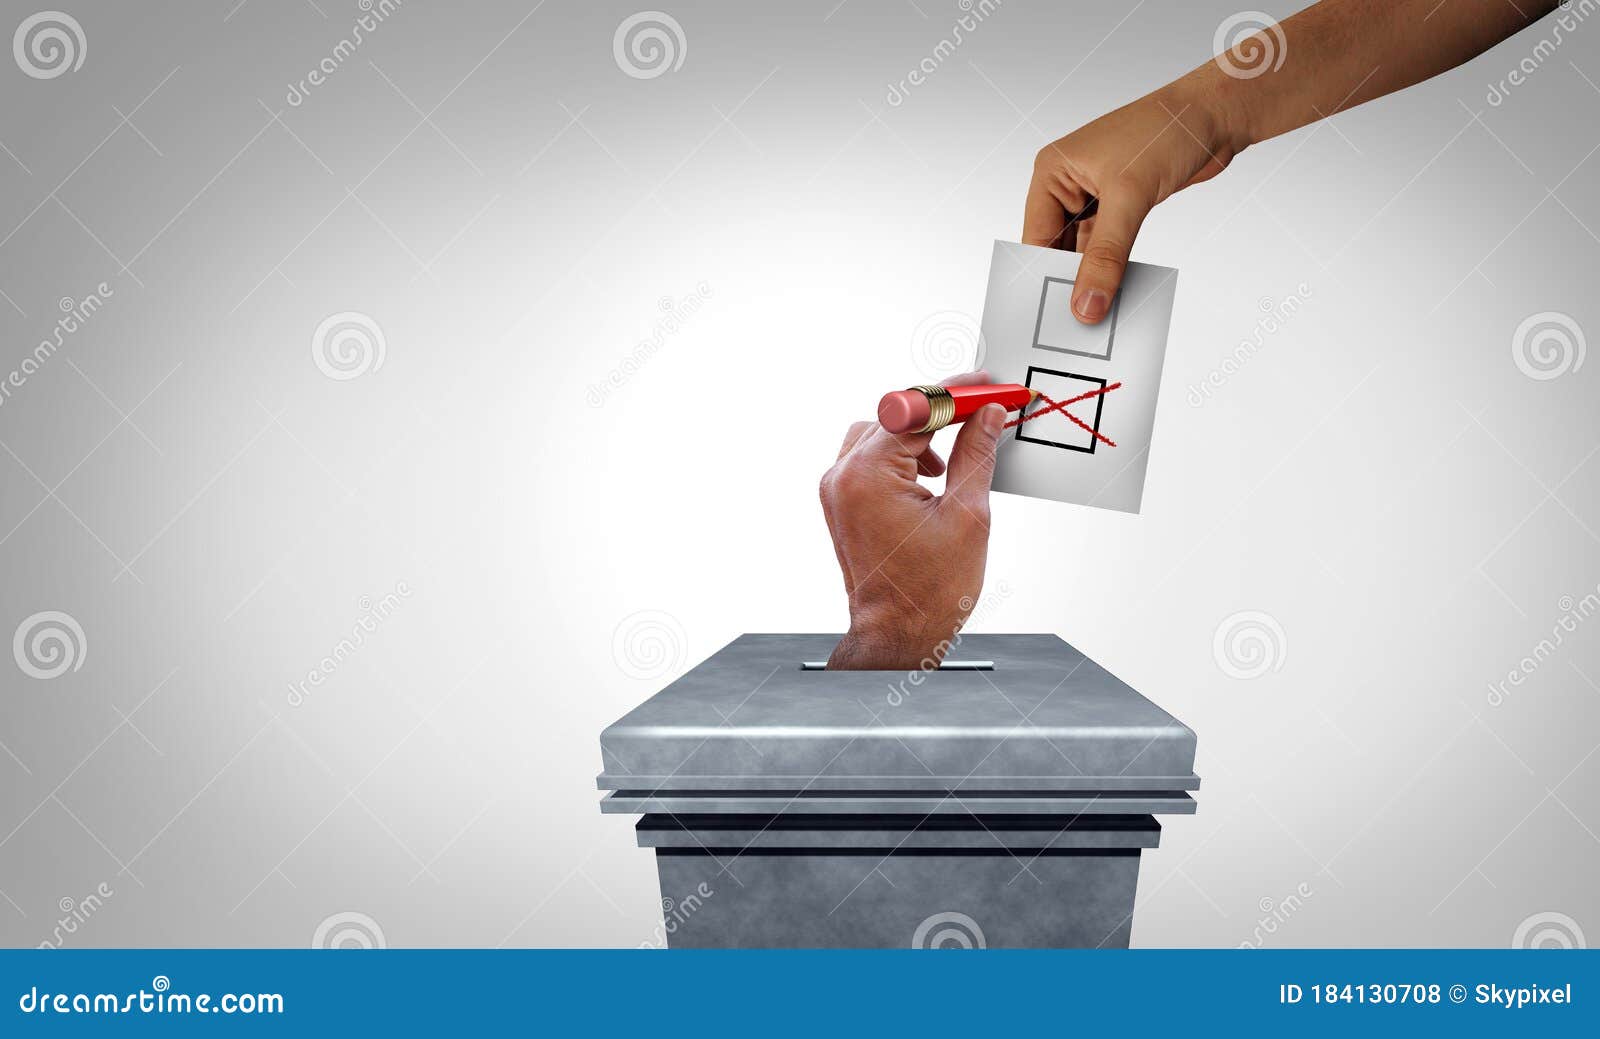 Election Fraud stock photo. Image of corruption, decision - 184130708